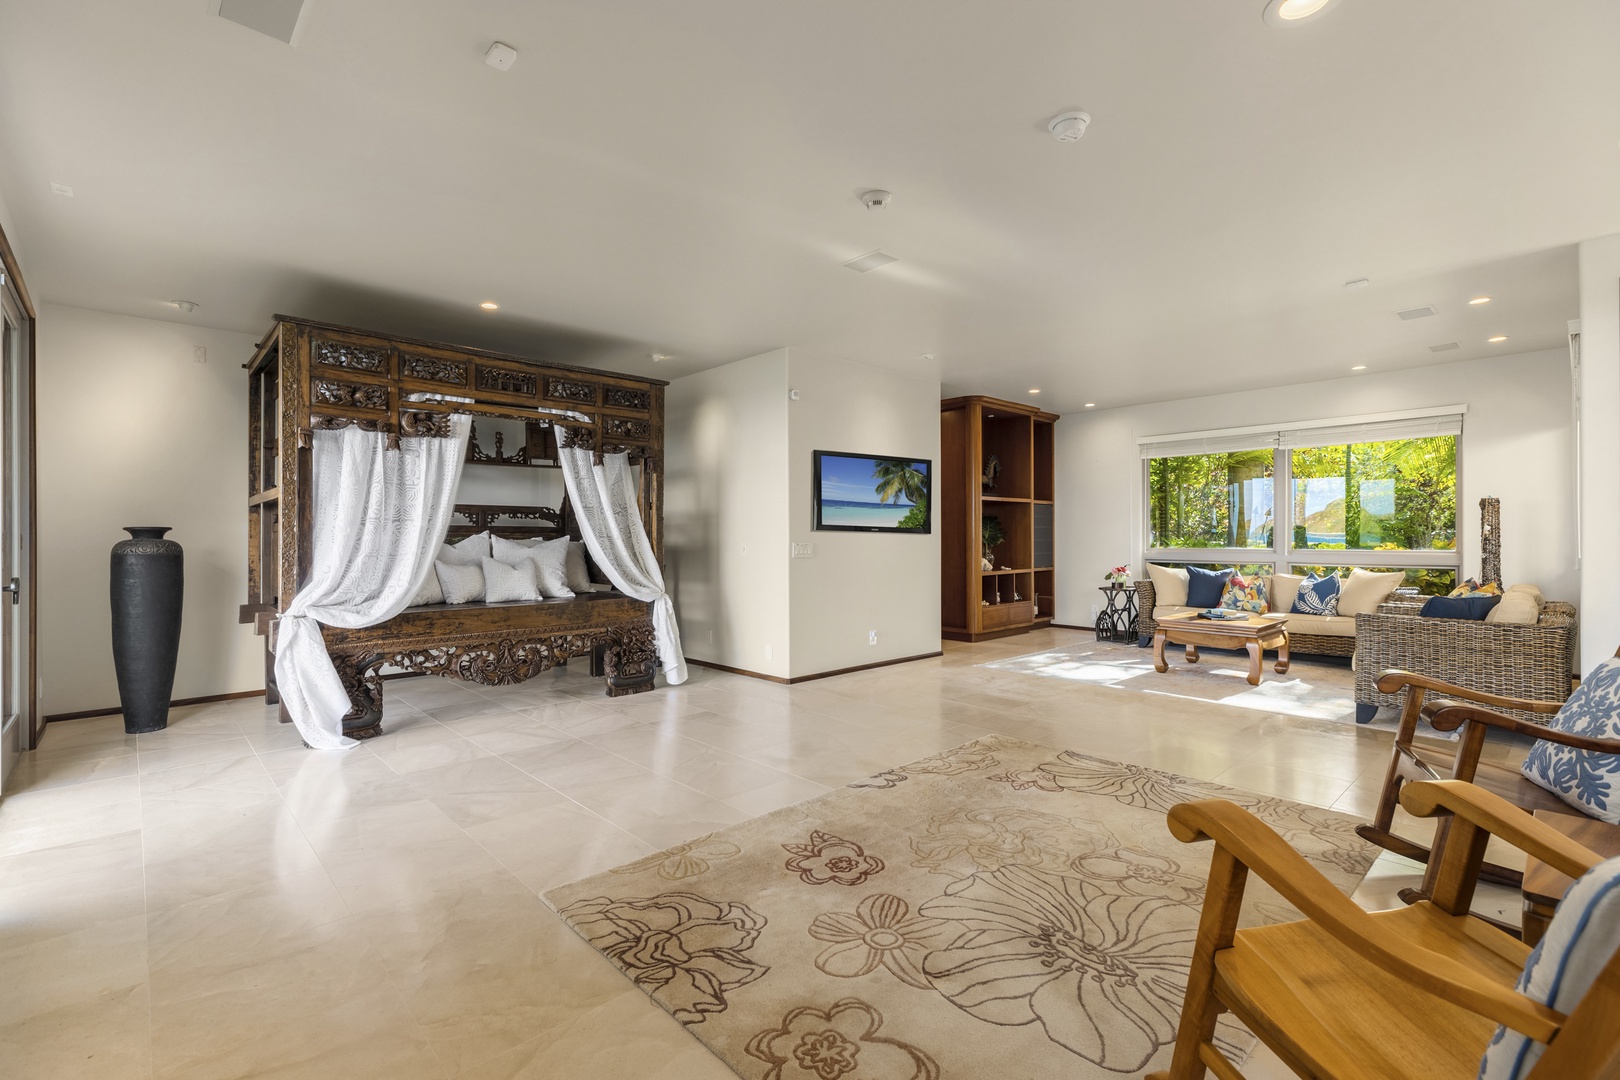 Kailua Vacation Rentals, Mokulua Sunrise - The Primary Bedroom is furnished with an Olympic queen bed, access to the ocean front lanai, walk-in closet, and ensuite bath